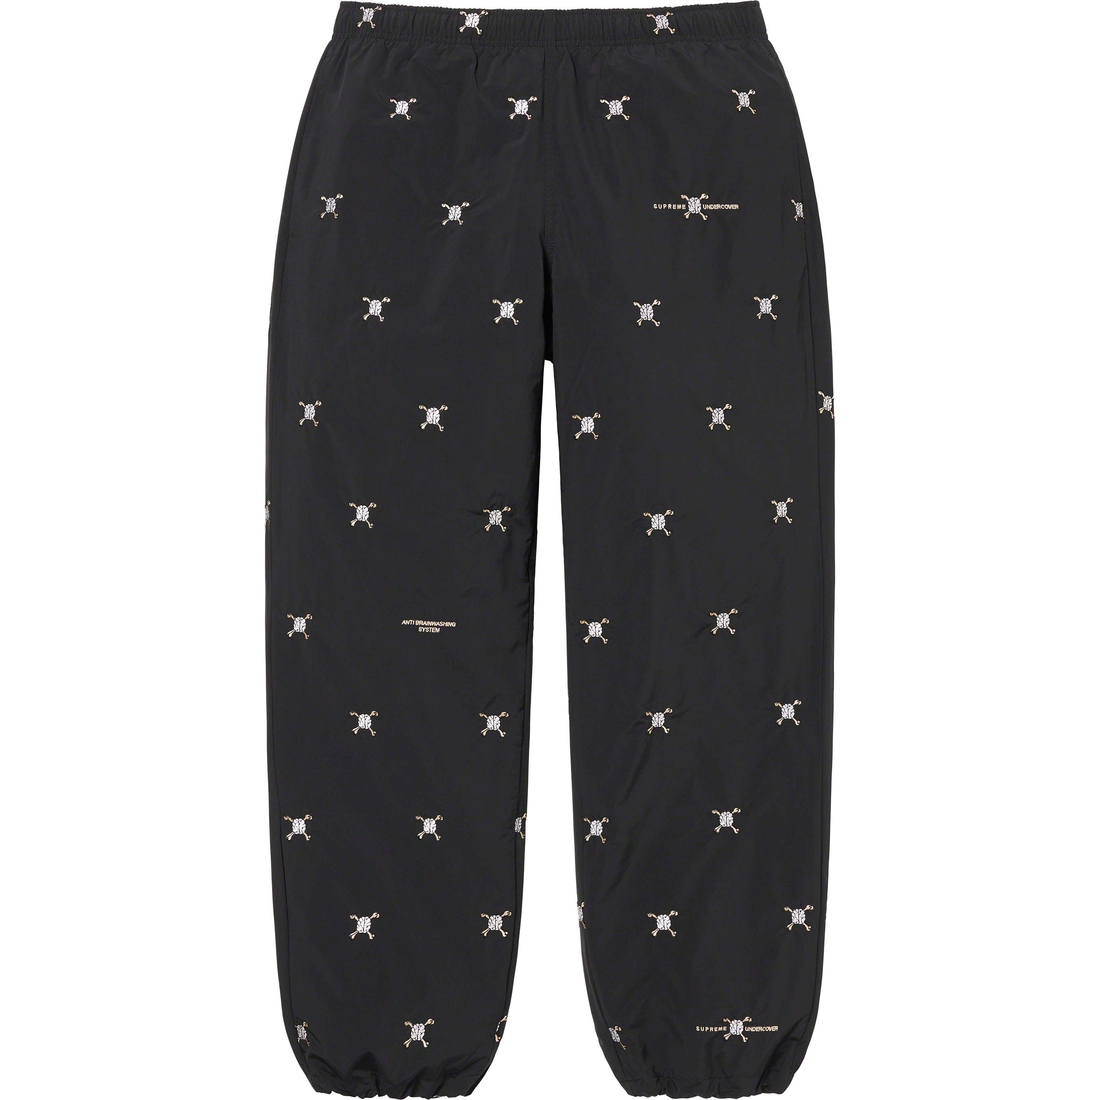 Details on Supreme UNDERCOVER Track Pant Black from spring summer 2023 (Price is $178)